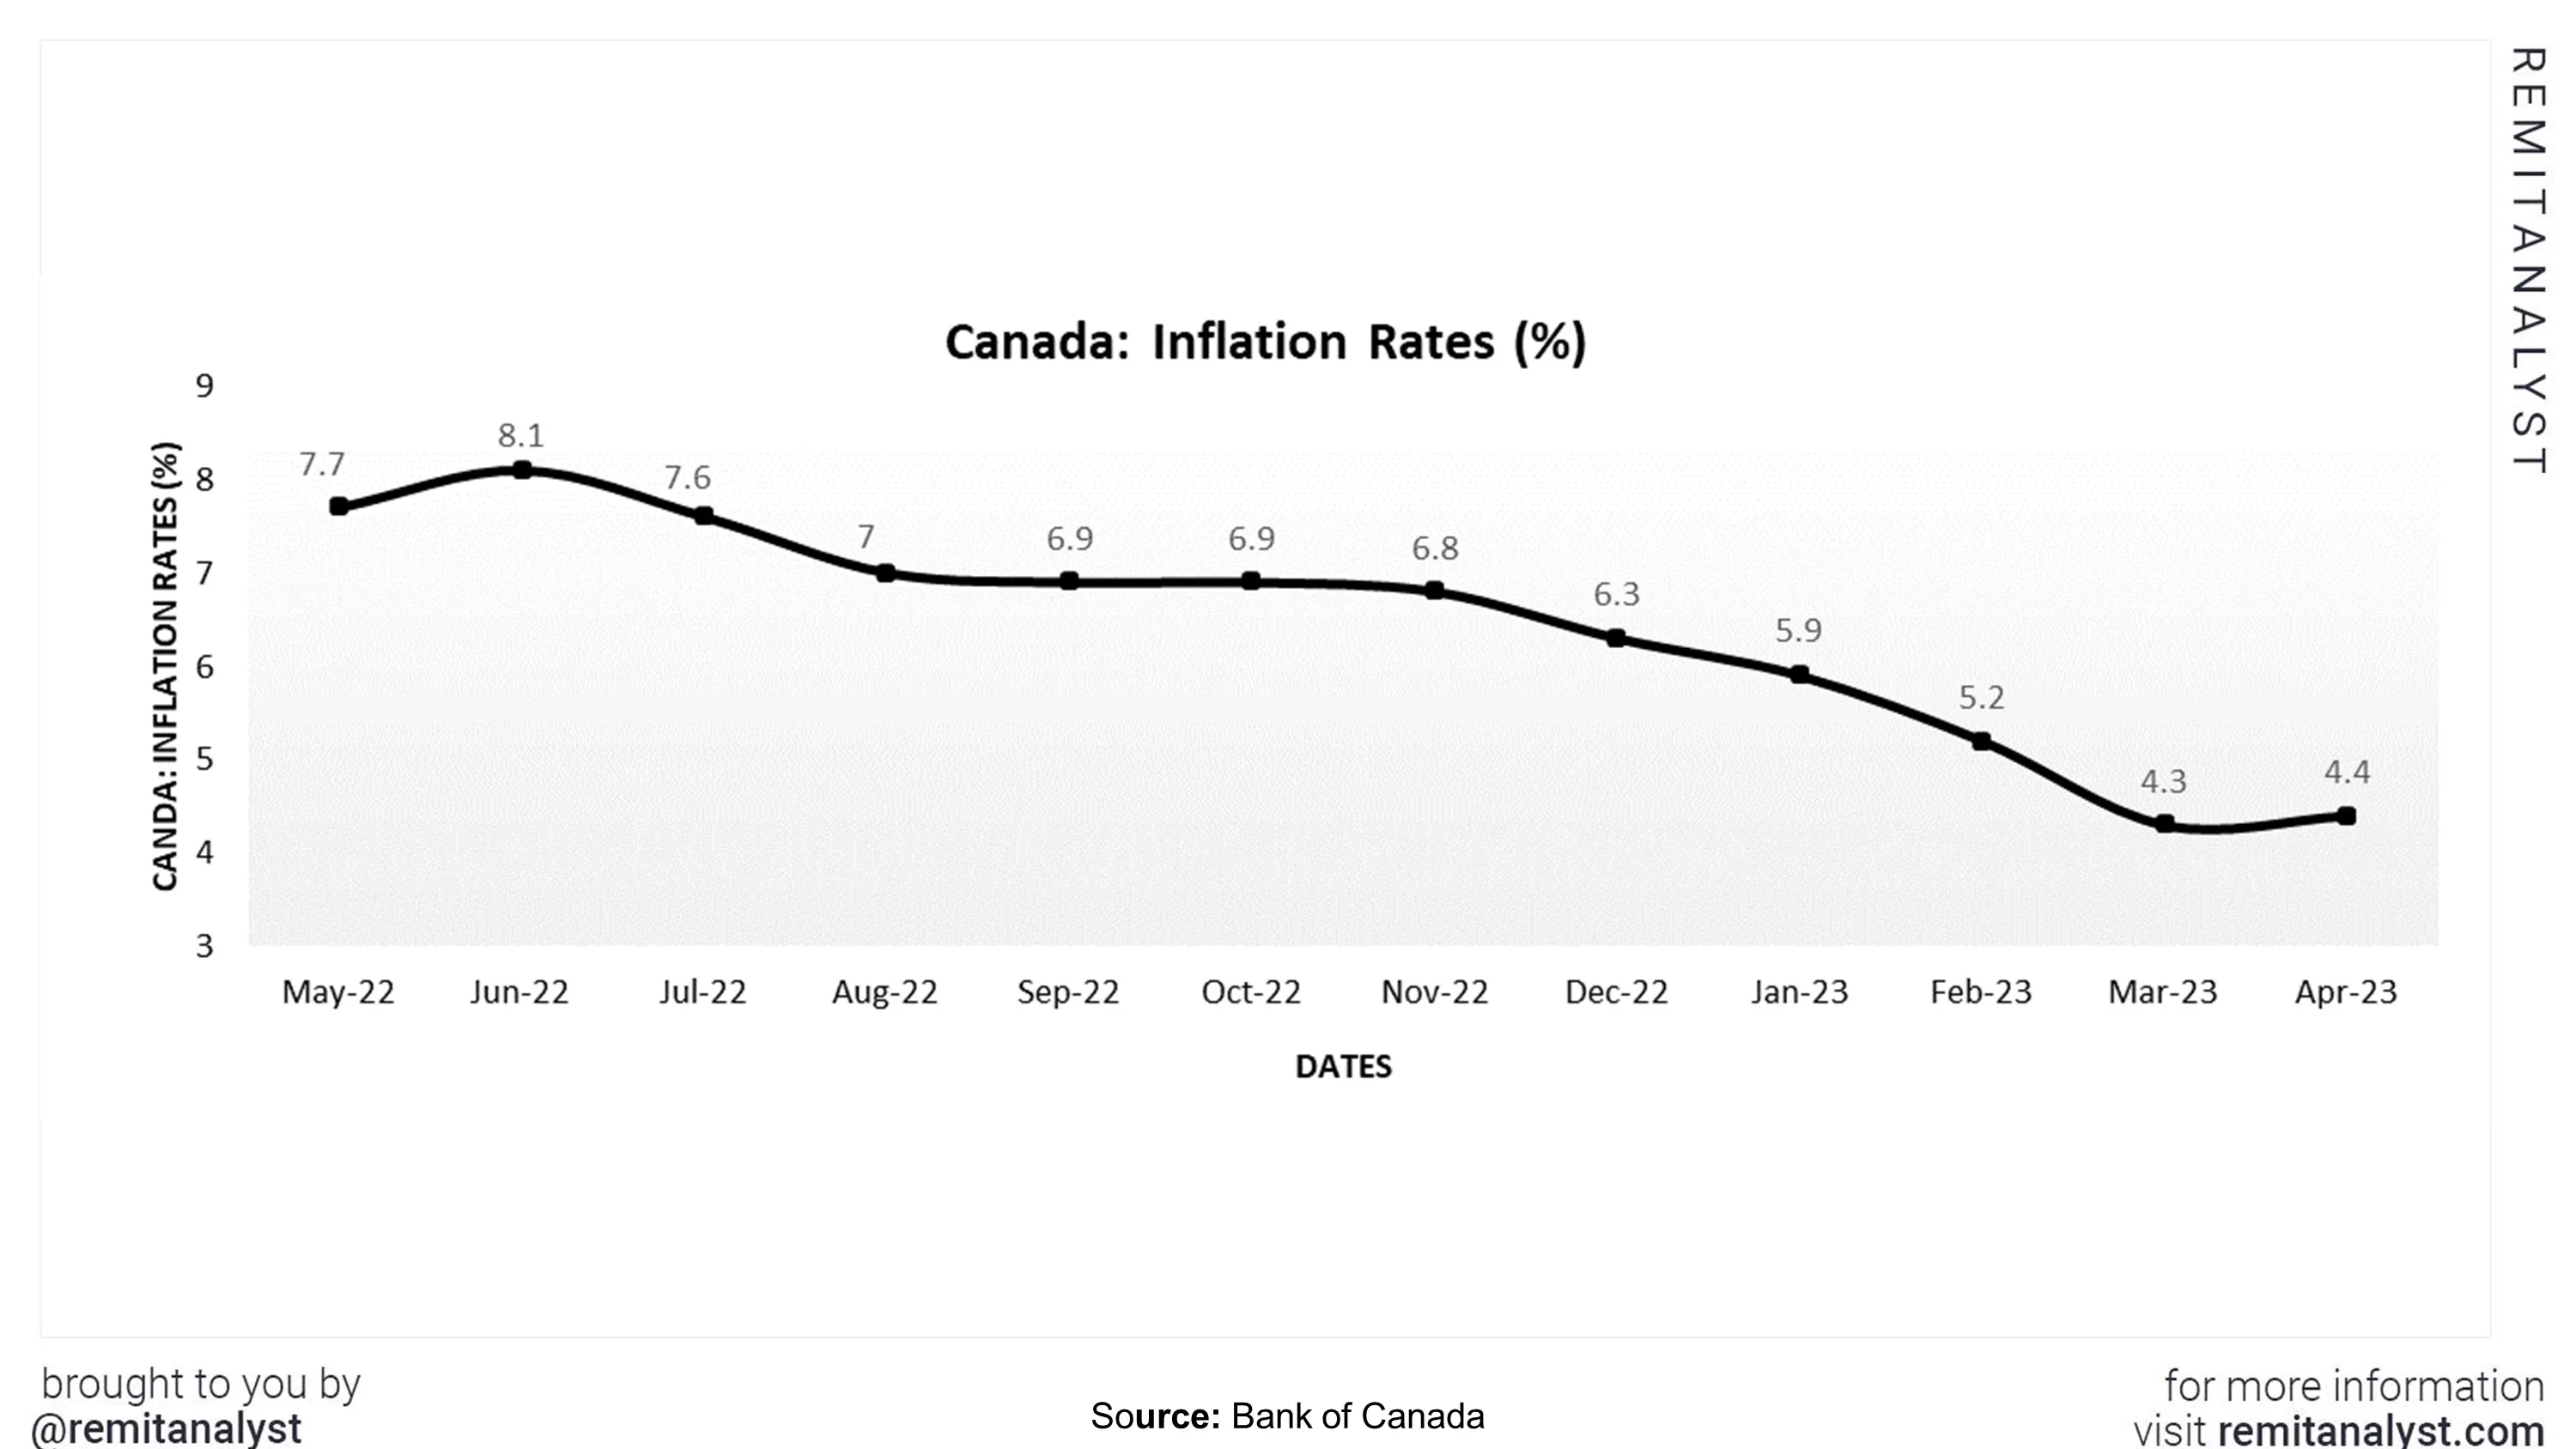 inflation-rates-canada-from-mar-2022-to-apr-2023